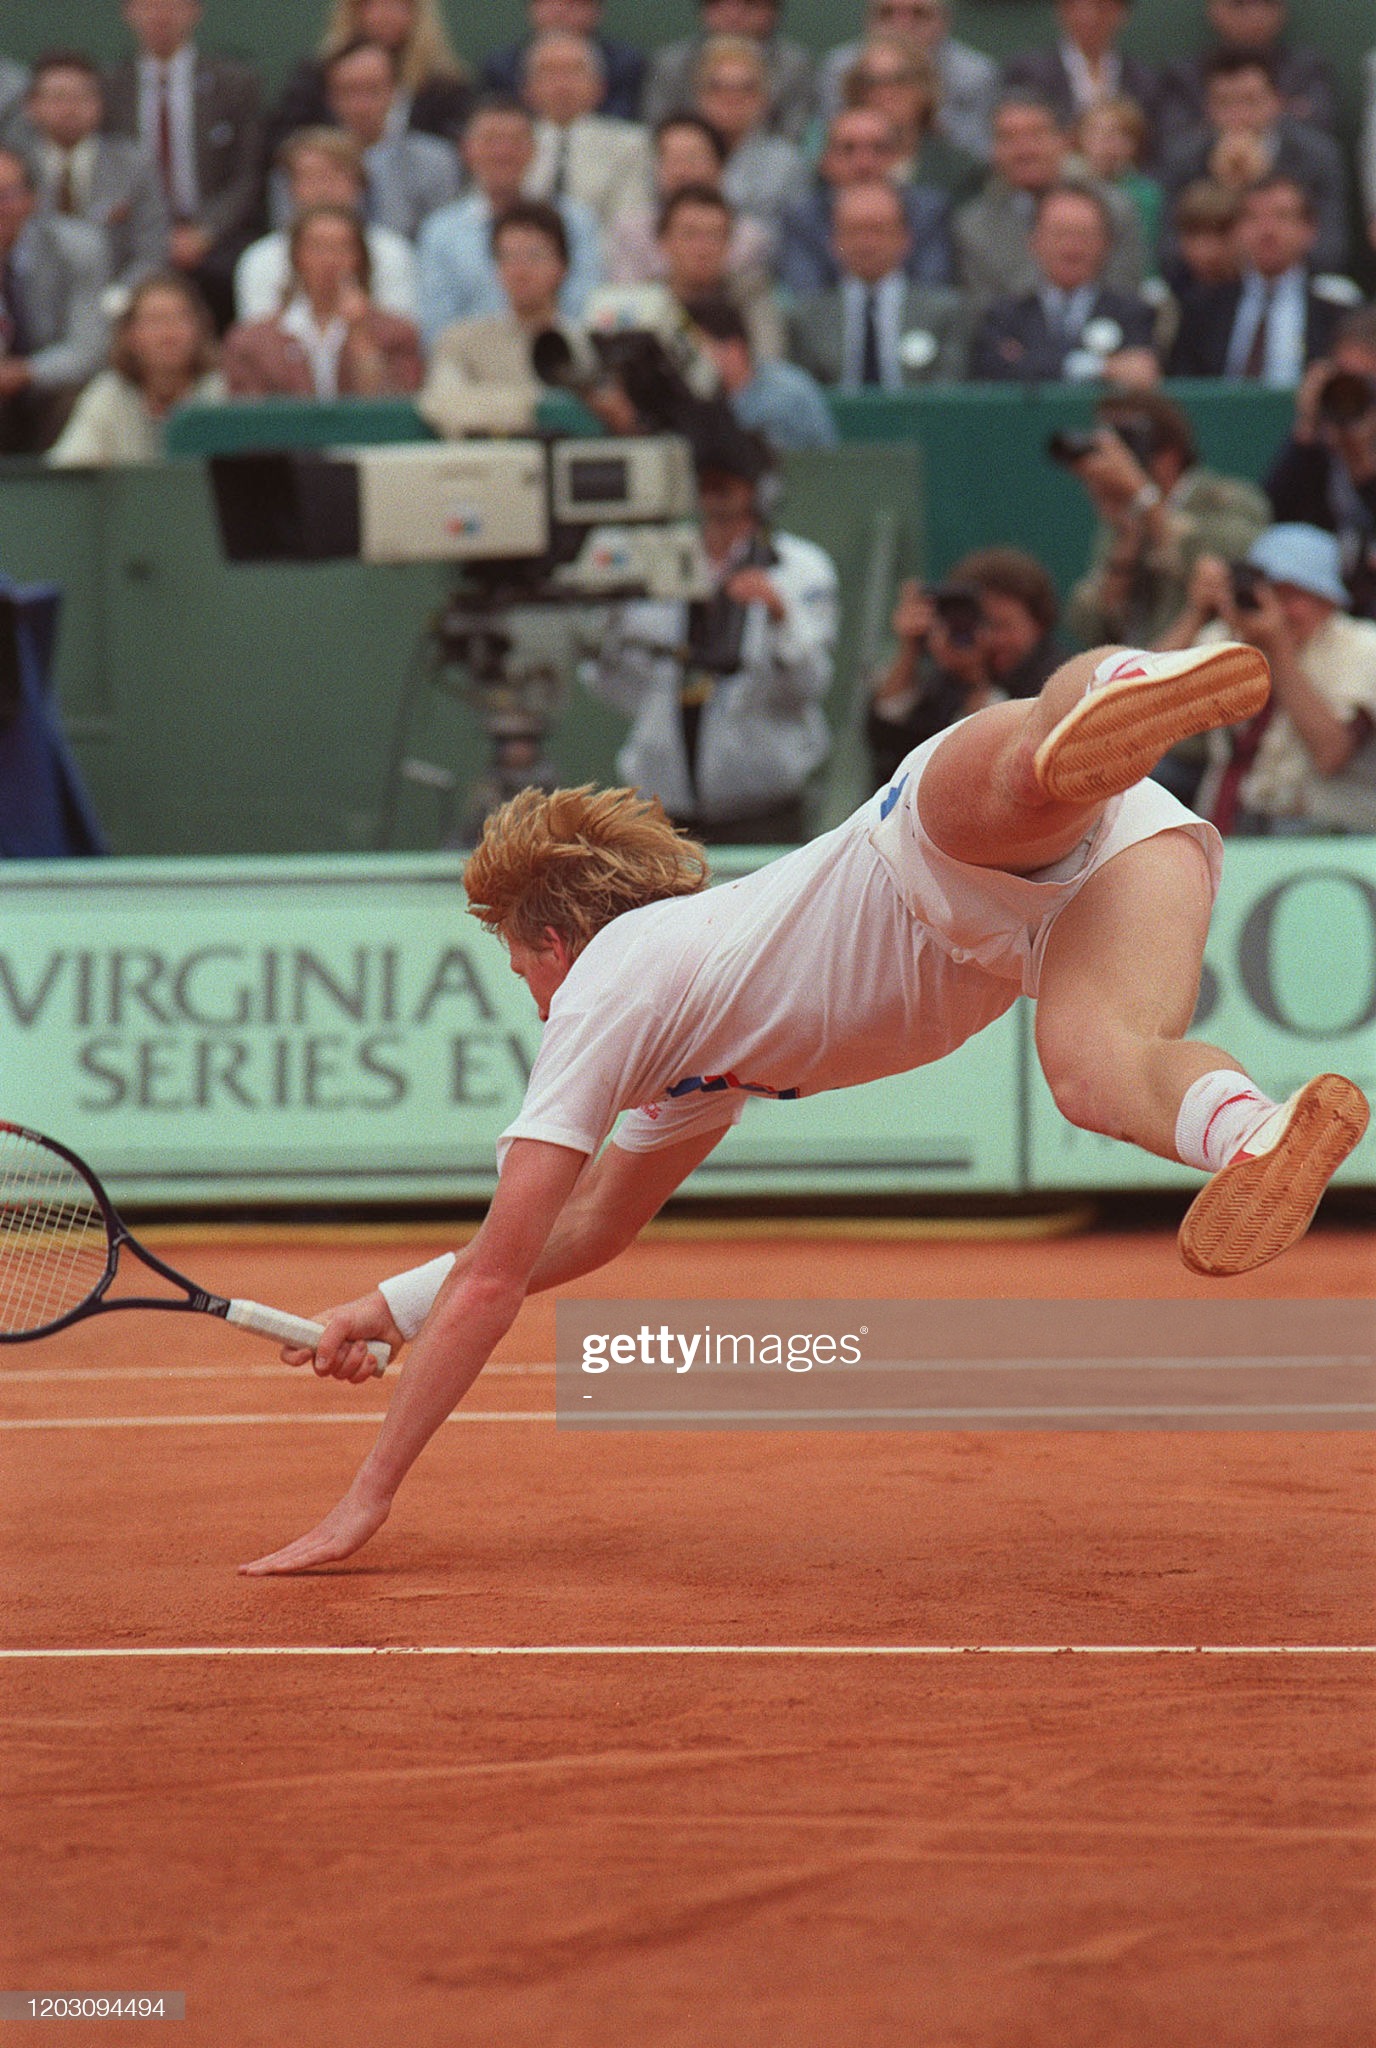 german-tennis-player-boris-becker-dives-to-reach-the-ball-in-his-picture-id1203094494.jpg